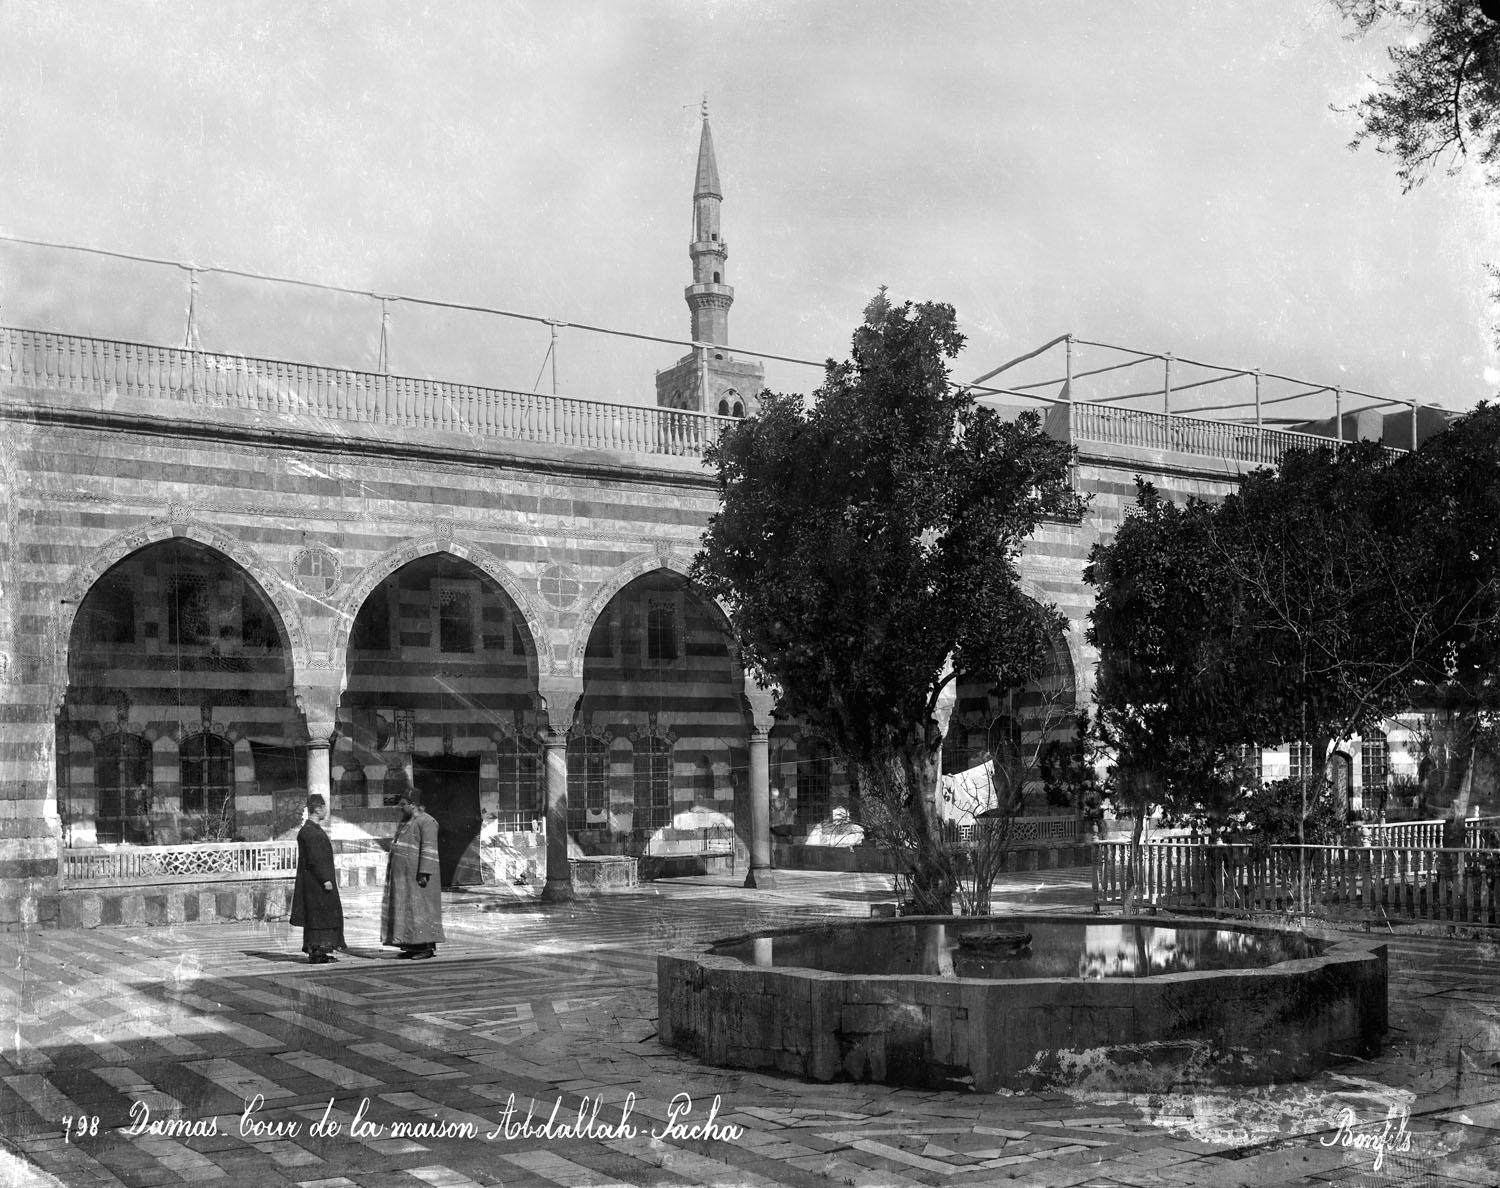 View of ablaq courtyard with fountain, arcade, and garden